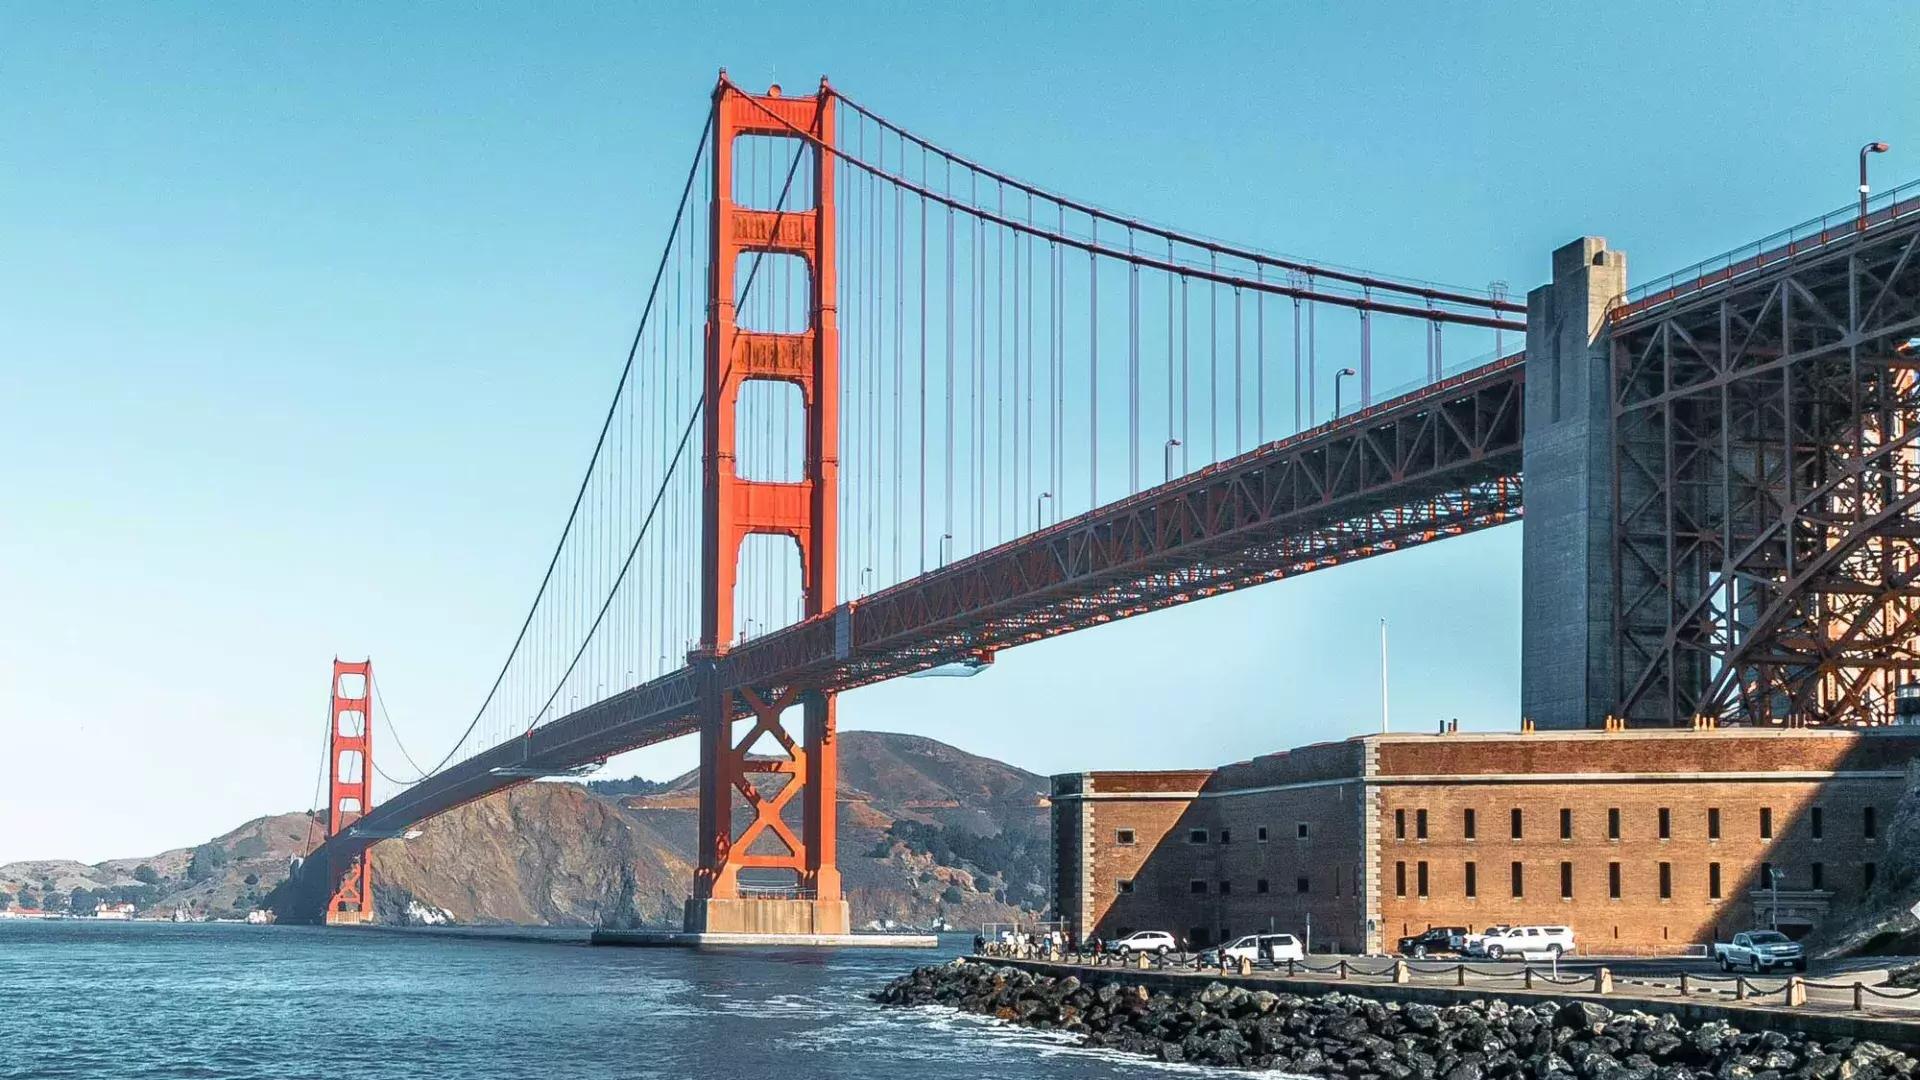 The Civil War-era Fort Point stands at the base of the Golden Gate Bridge.